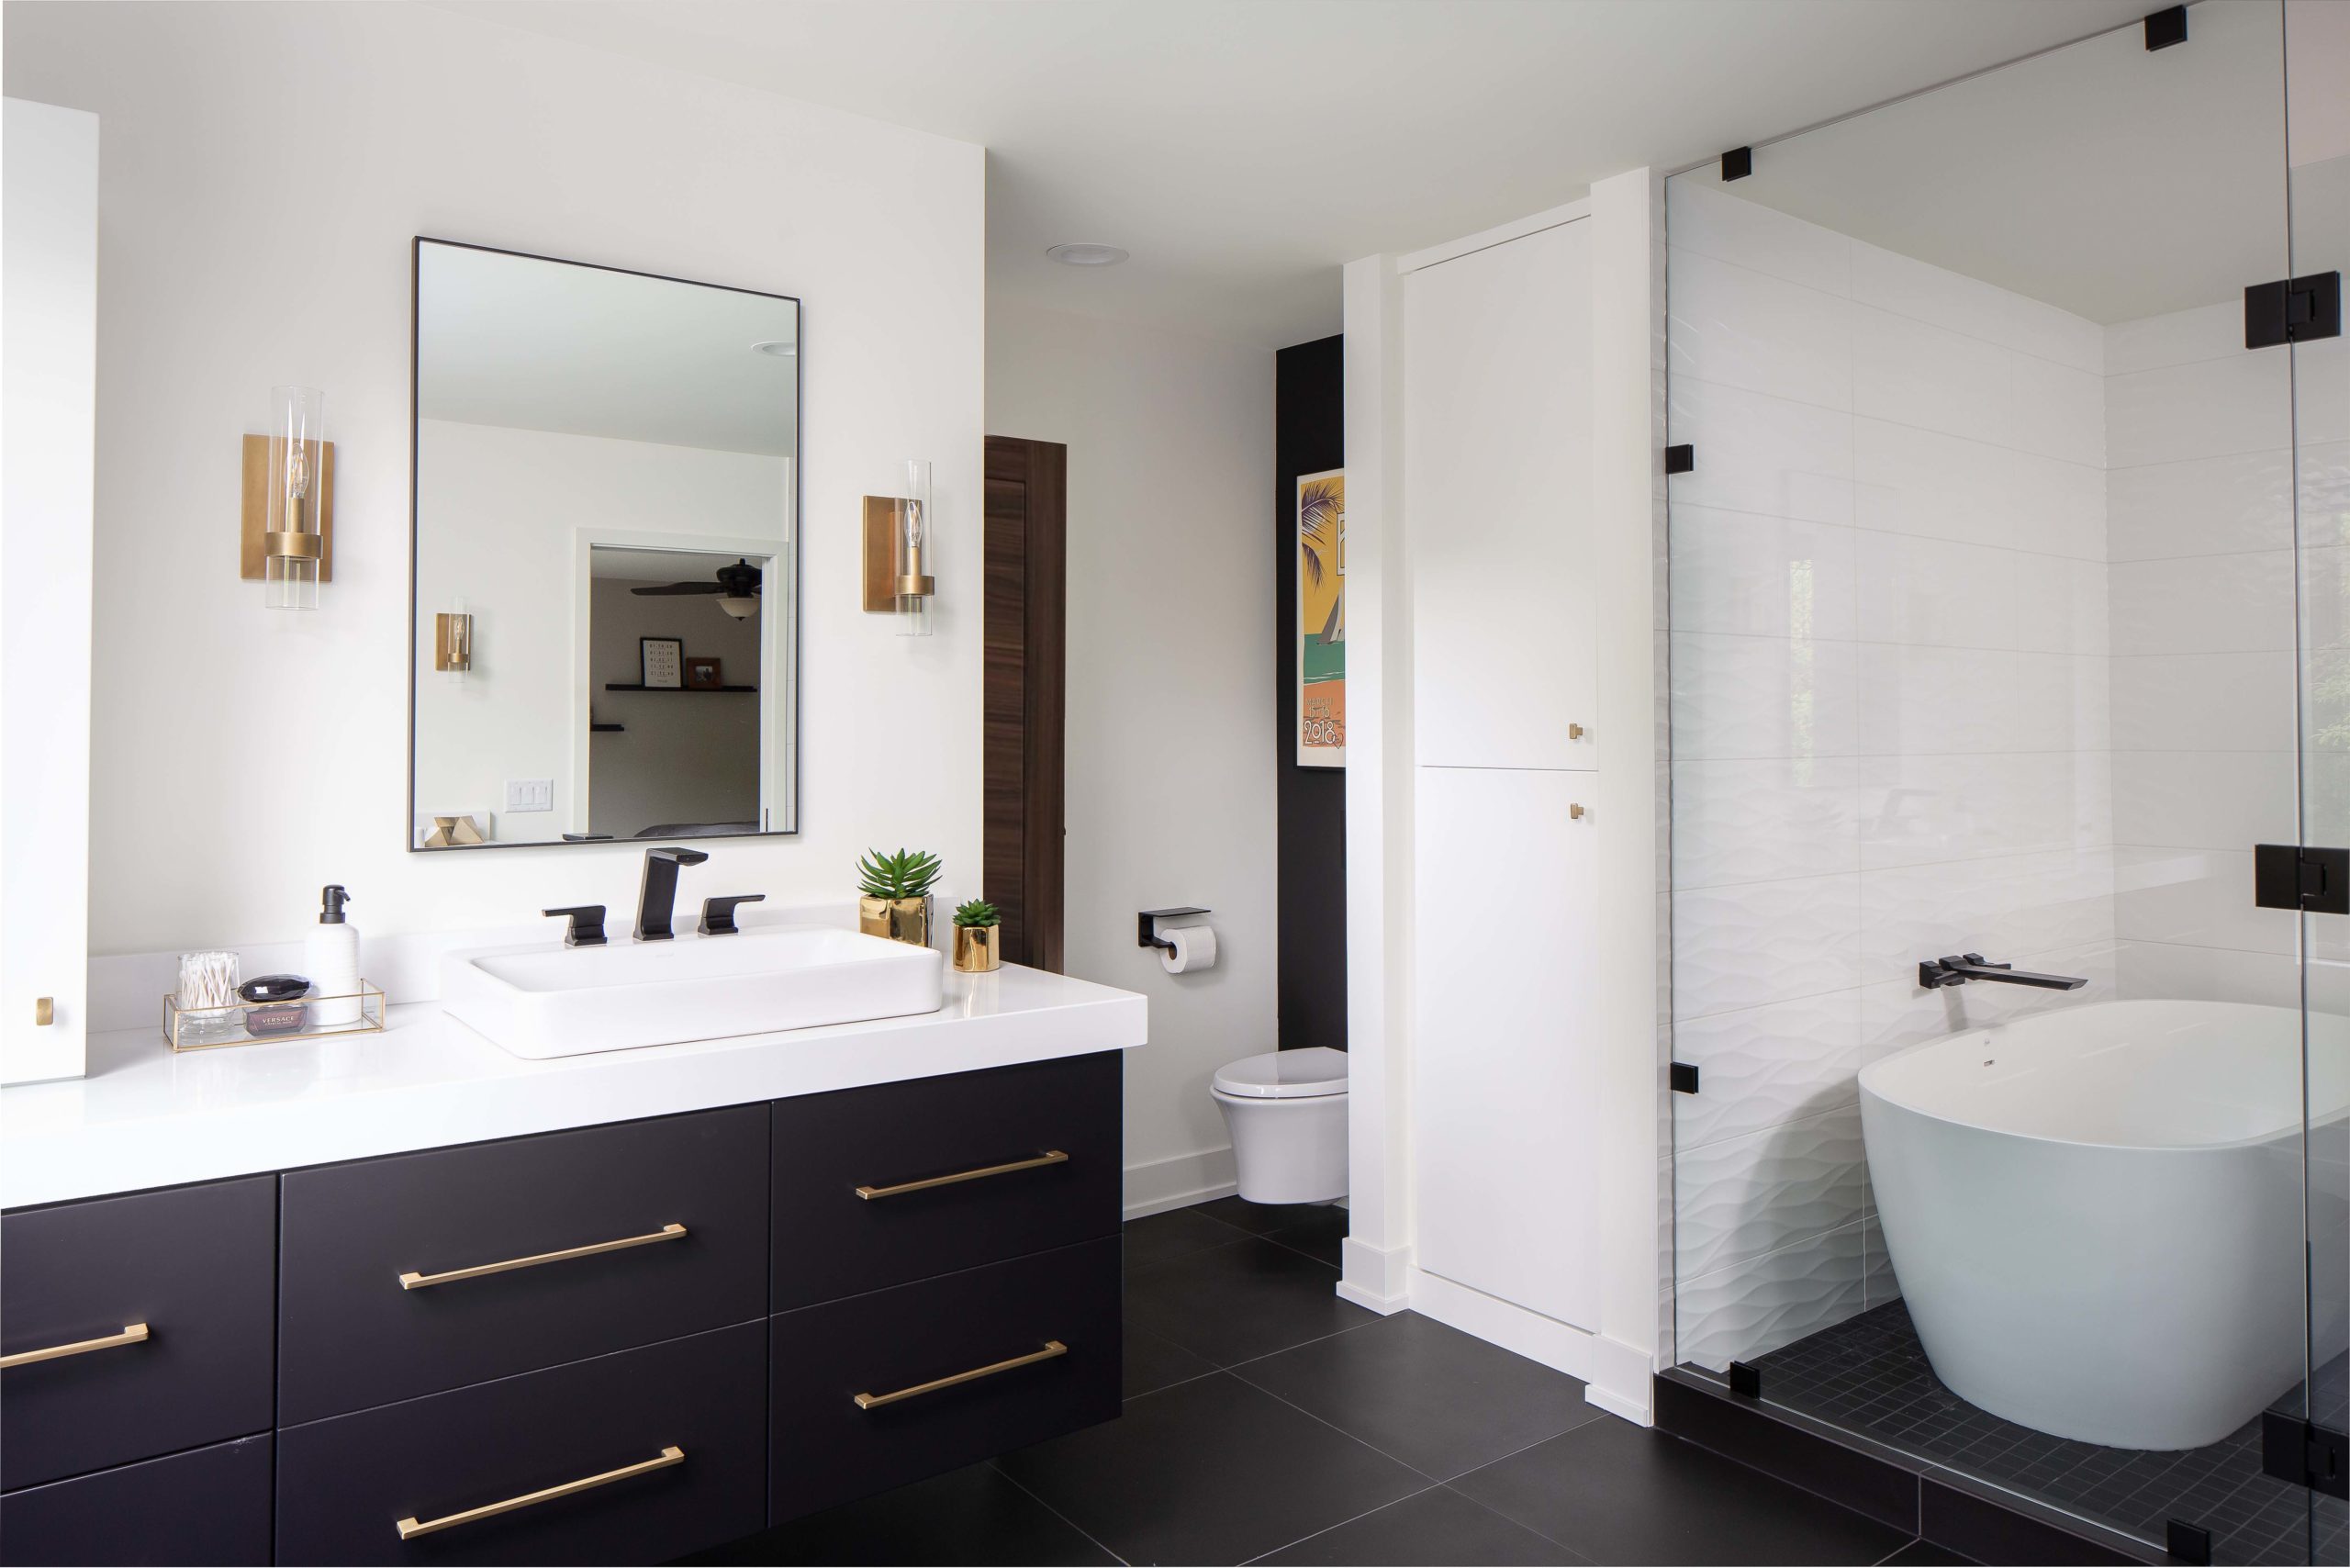 A modern black and white bathroom remodel featuring a tub and sink.